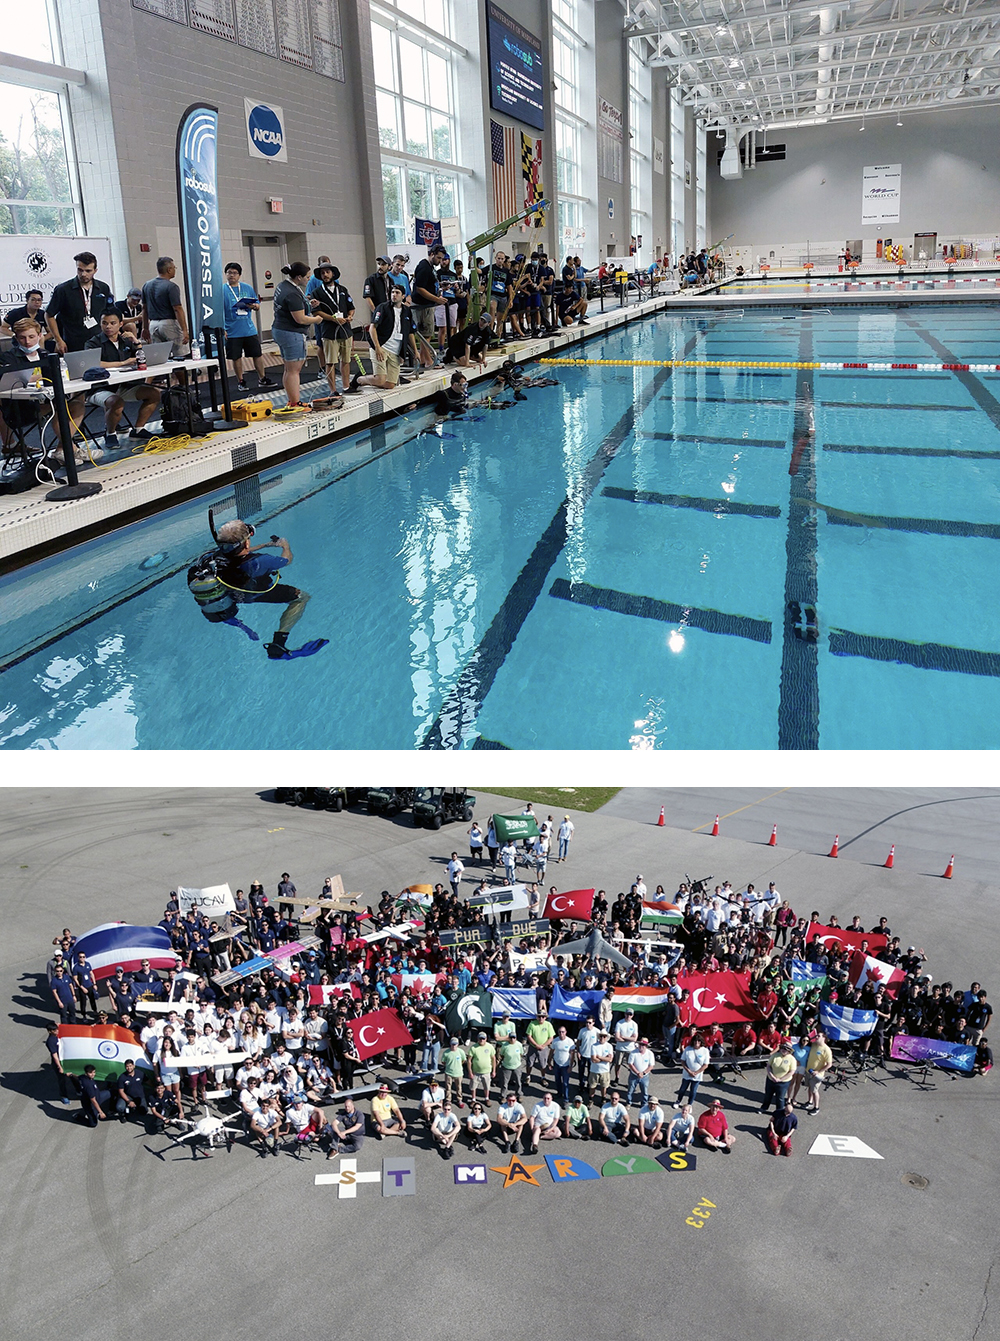 CLICK PHOTO FOR LARGER VIEWTop: Participants gather in the Eppley Aquatic Center for the 2022 RoboSub competition. Bottom: Competitors in the 2022 SUAS competition, as viewed by a UAS Test Site drone. Photo credits. Top: U.S. Navy Office of Information. Bottom: UAS Test Site.